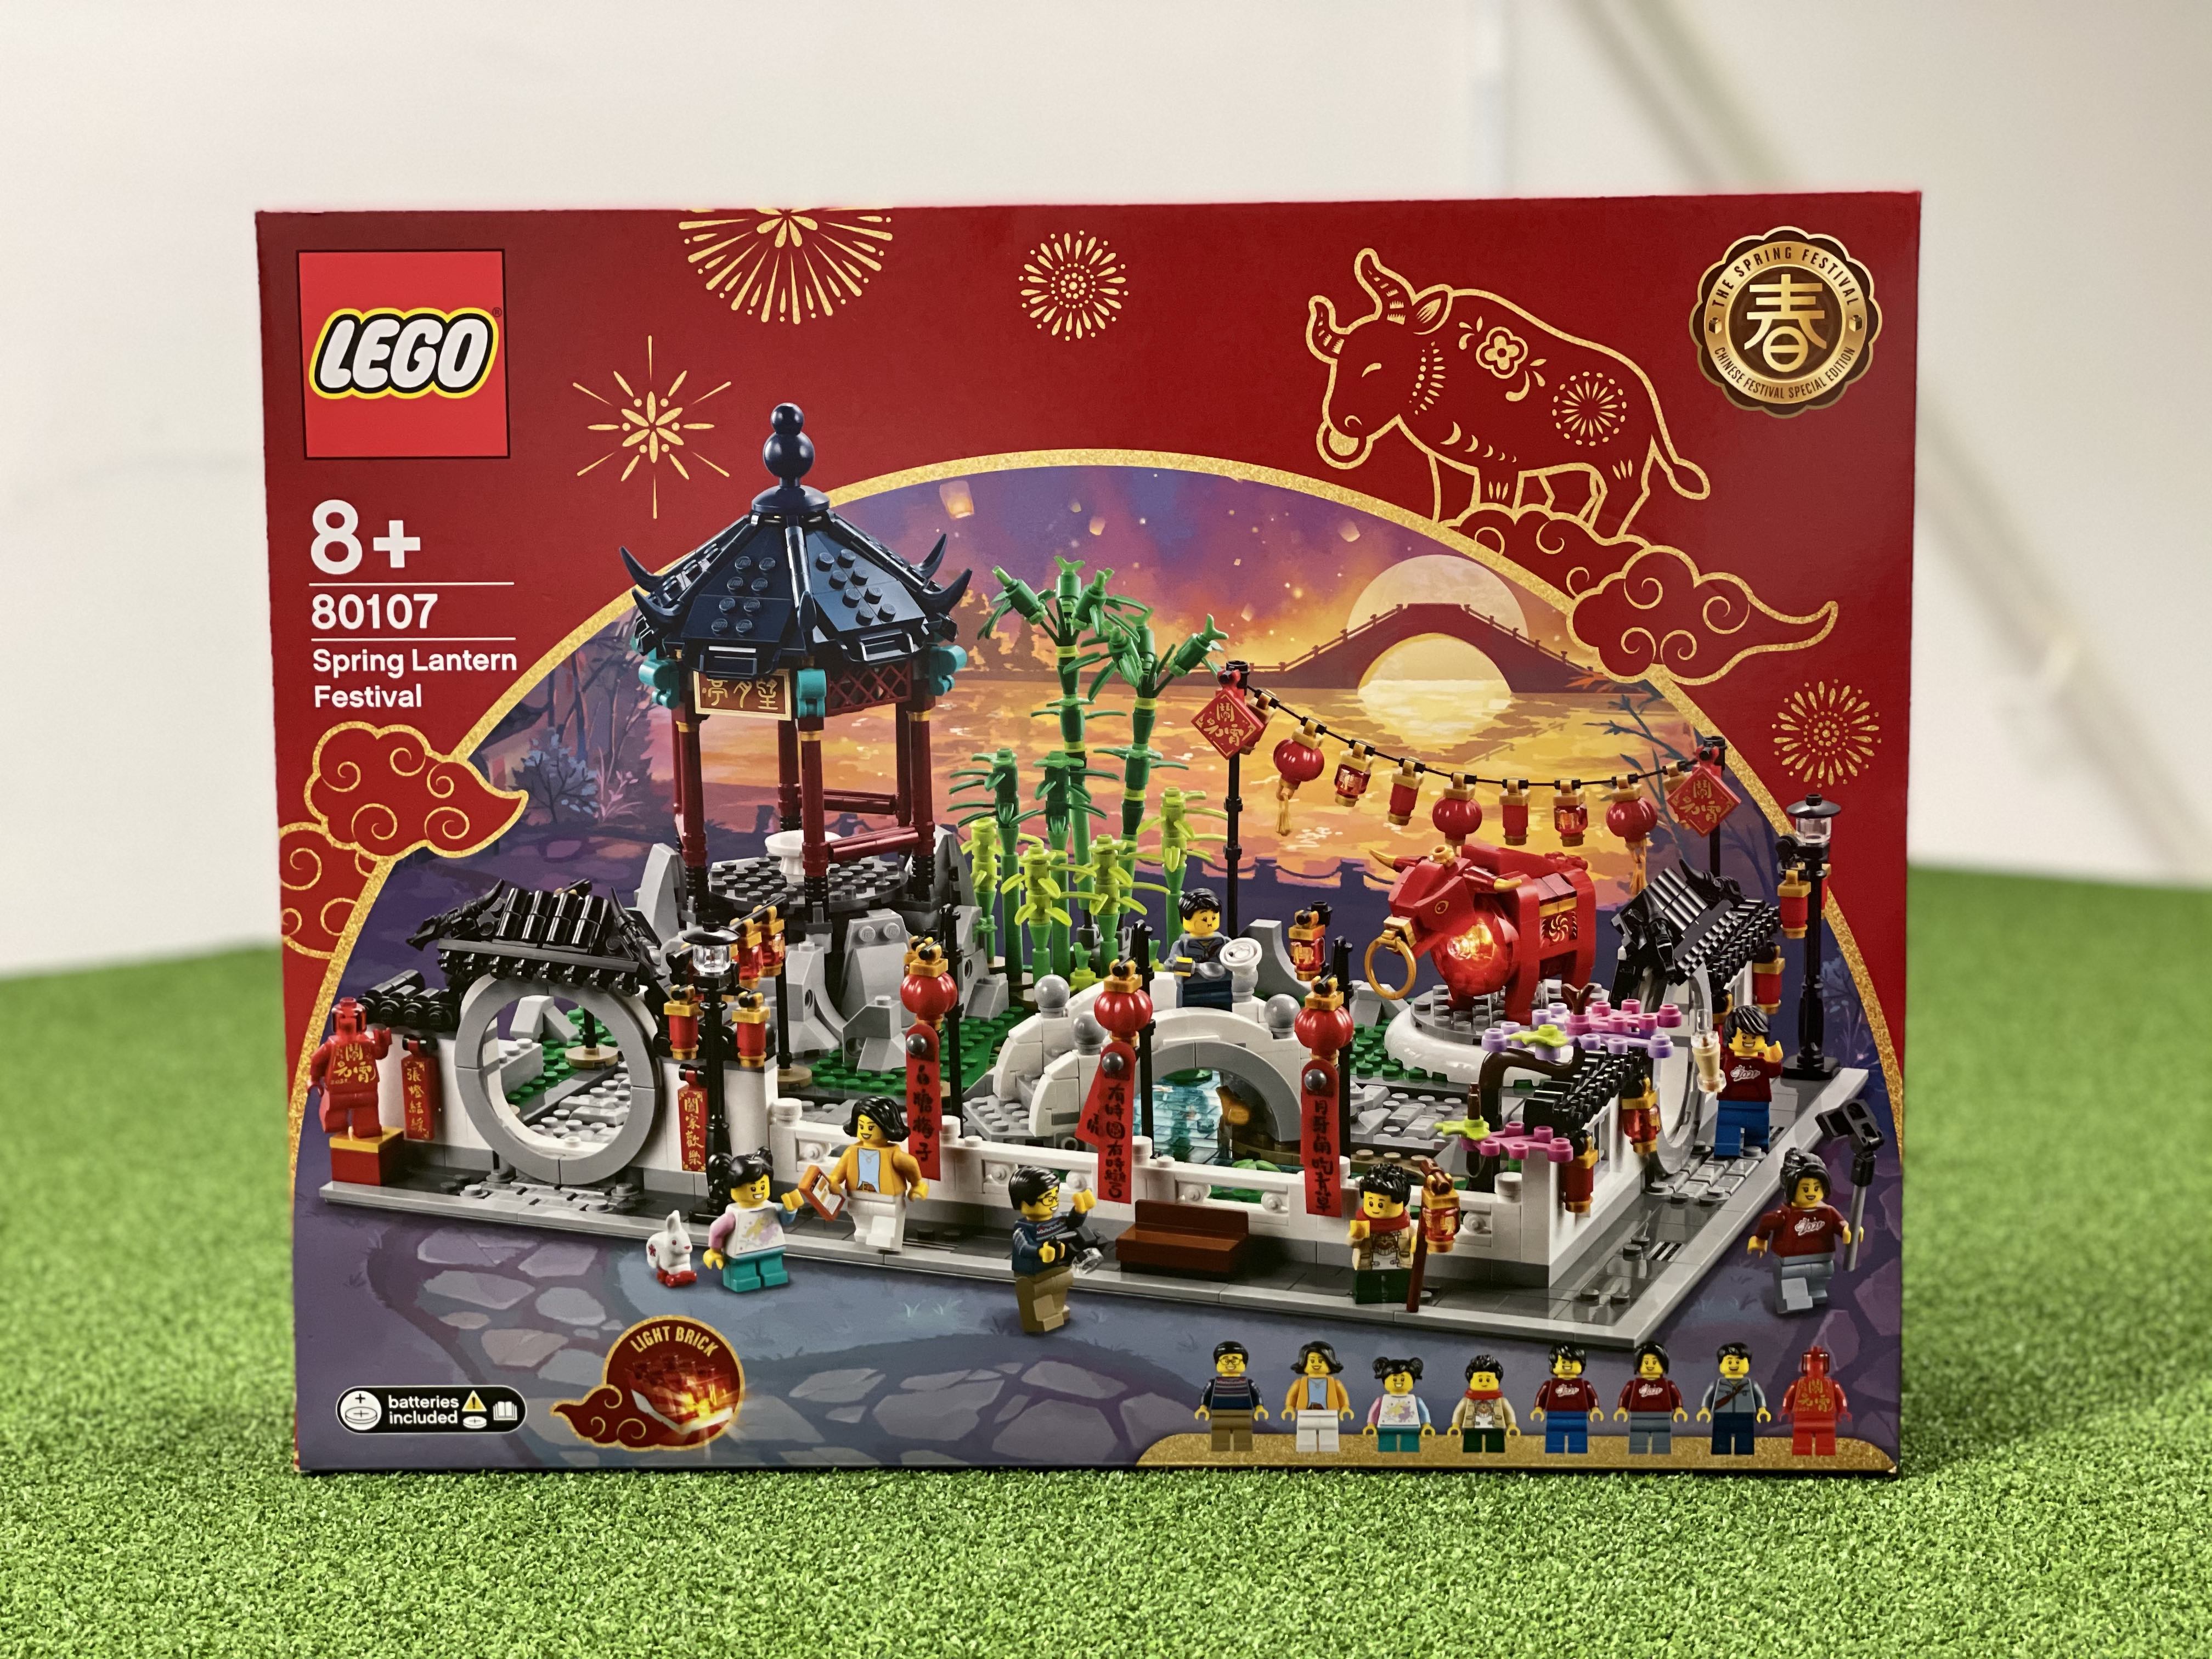 Lego releases three new Chinese New Year sets meant to teach kids about